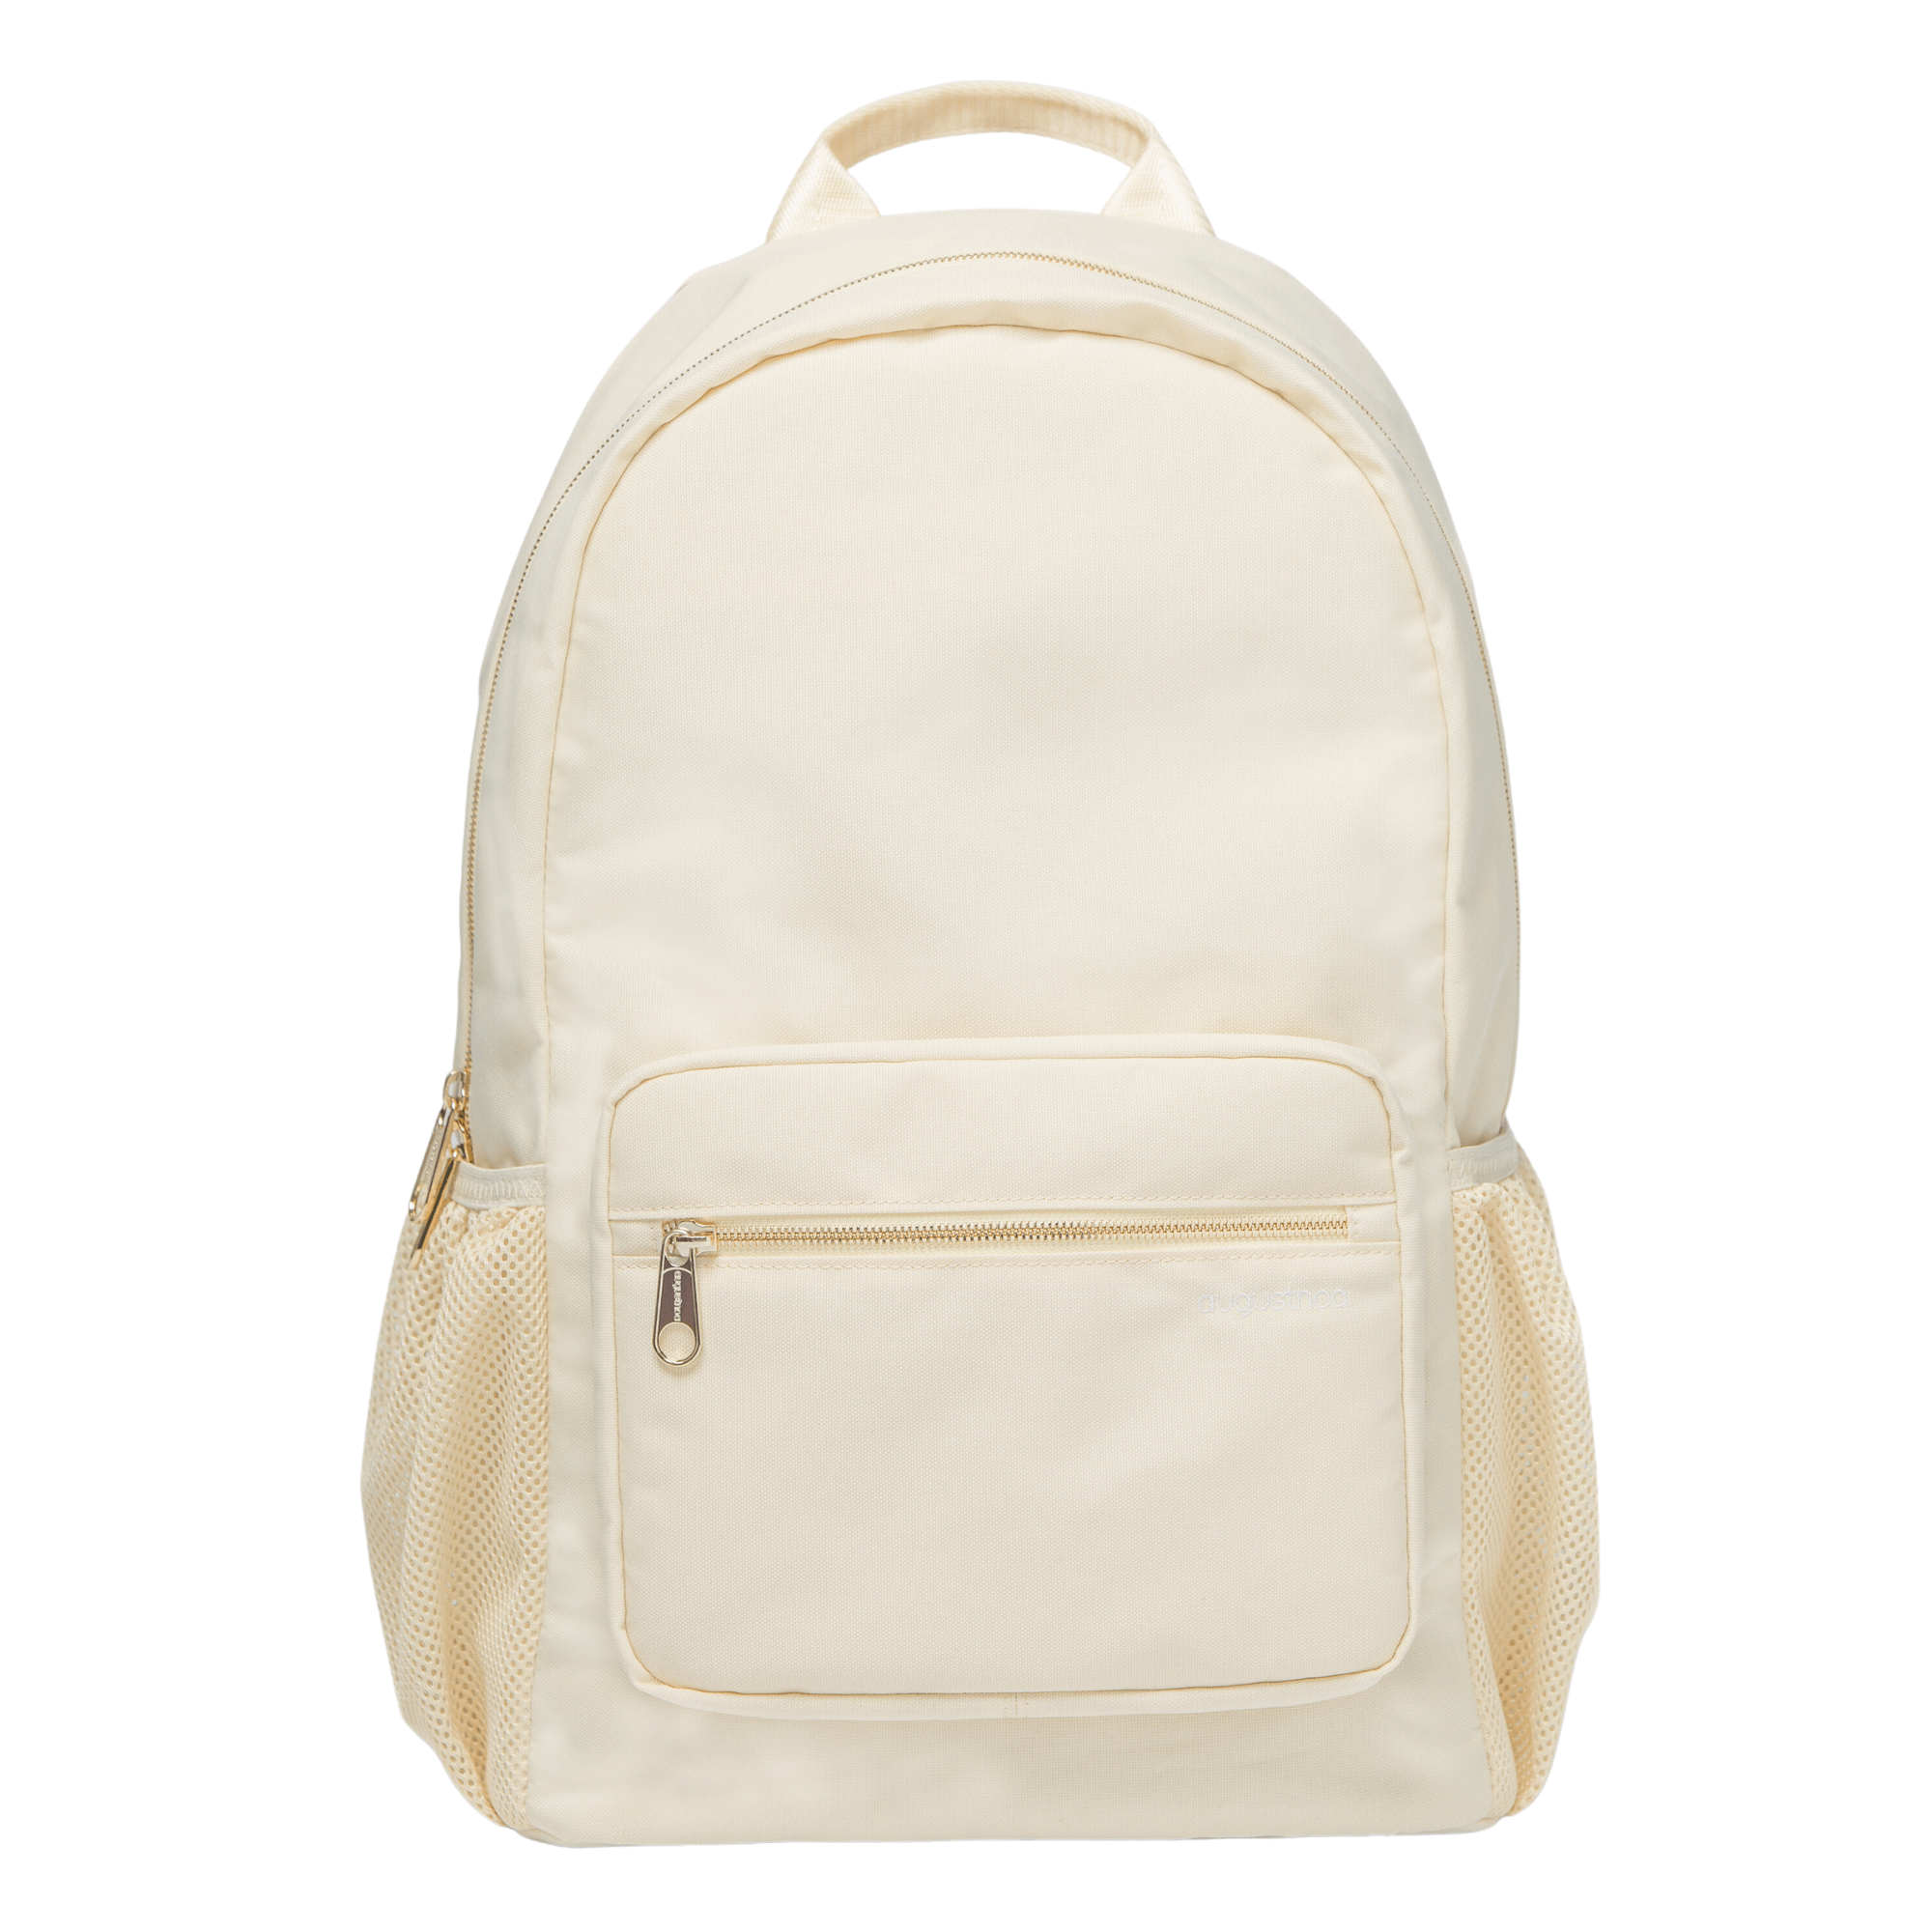 cream backpack with gold hardware, laptop protector and multiple pockets